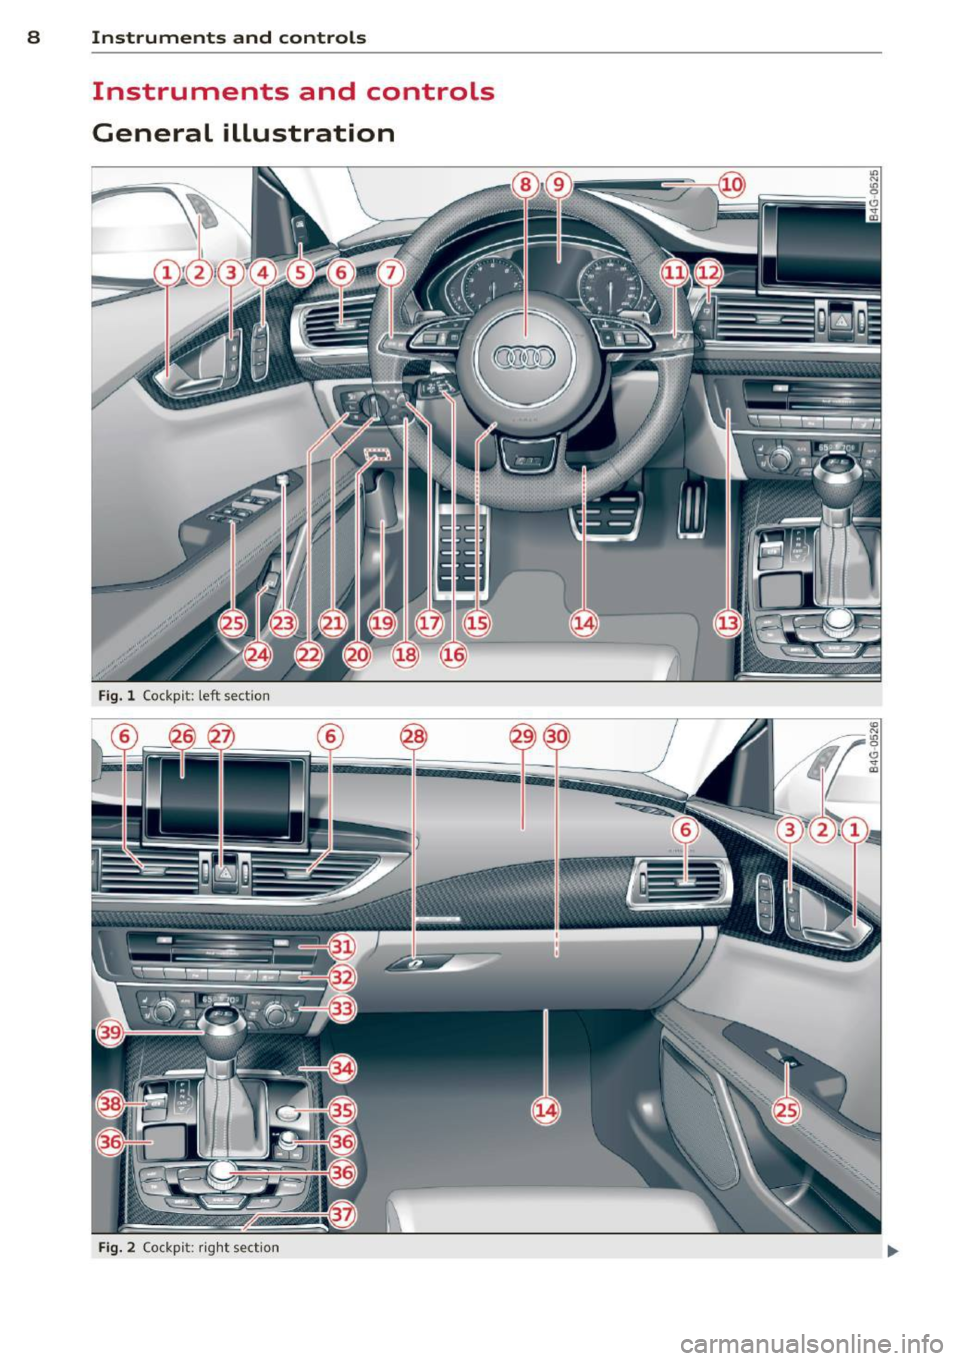 AUDI RS7 SPORTBACK 2014  Owners Manual 8  Instruments and controls 
Instruments  and  controls 
General  illustration 
Fig. l Cockp it:  left  sect io n 
Fig. 2 Cockp it : ri ght  sect io n  